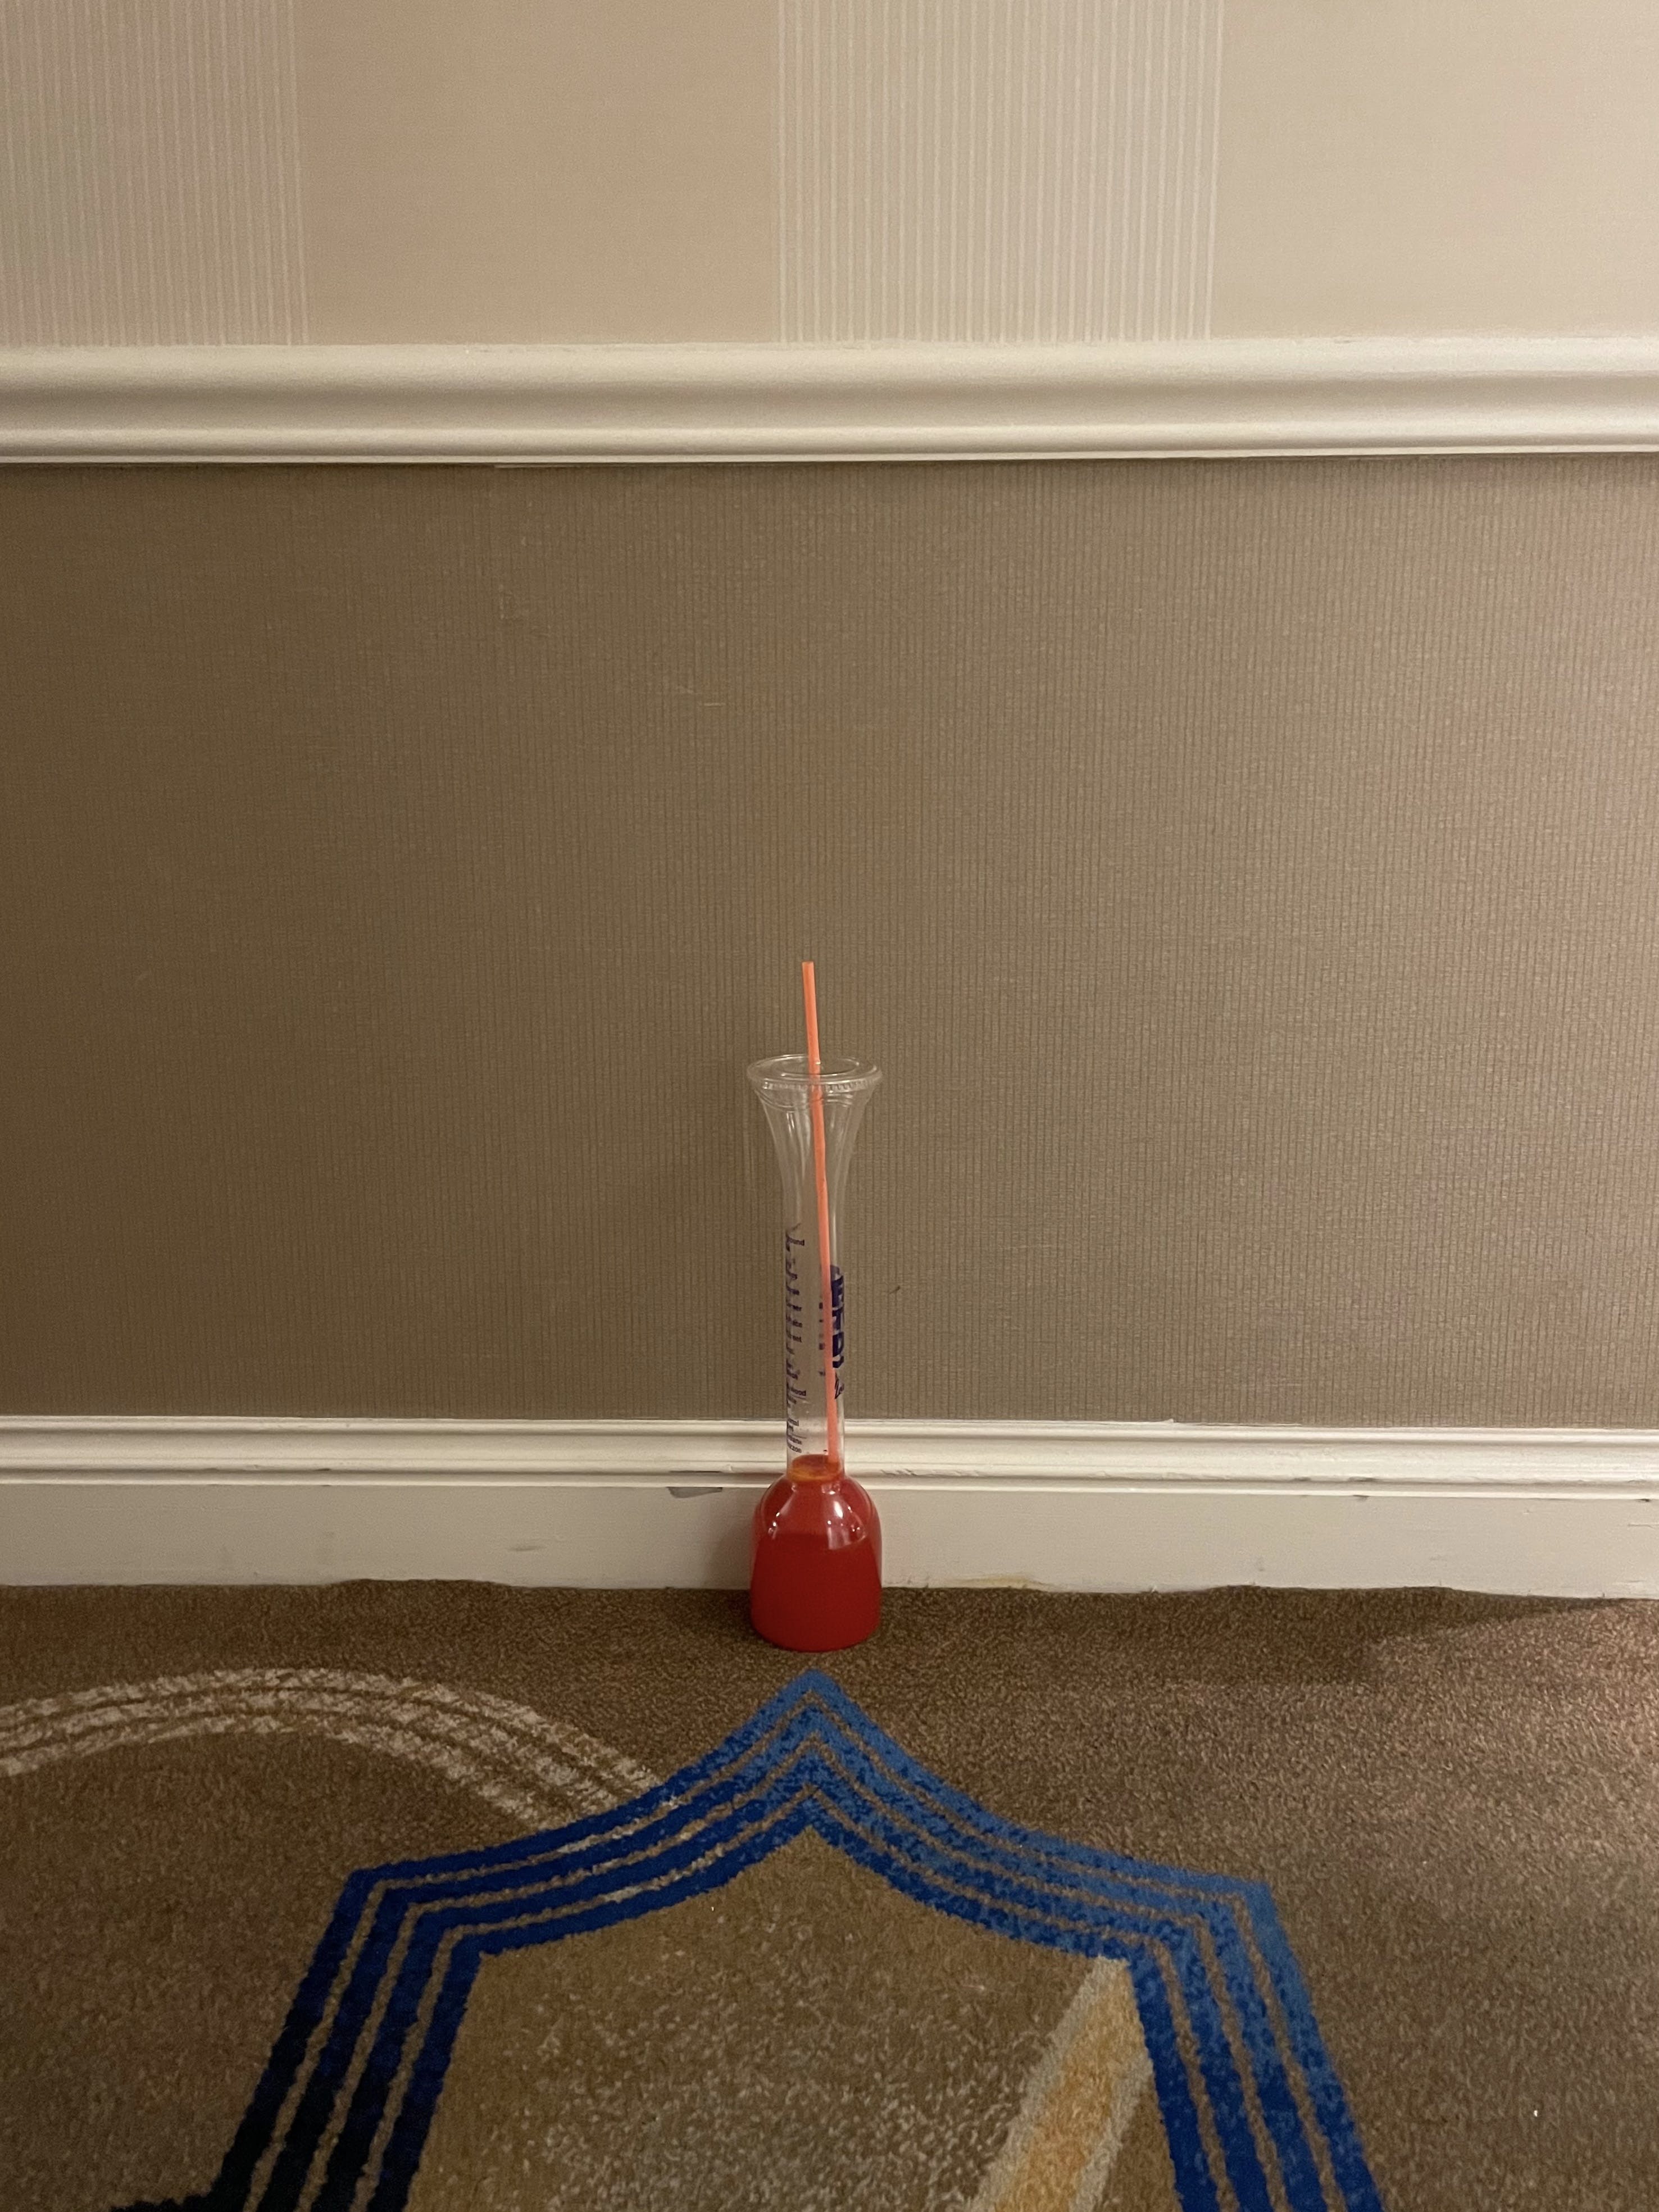 a fallen soldier stuck in a physical liminal space (hotel hallway) in the liminal city.